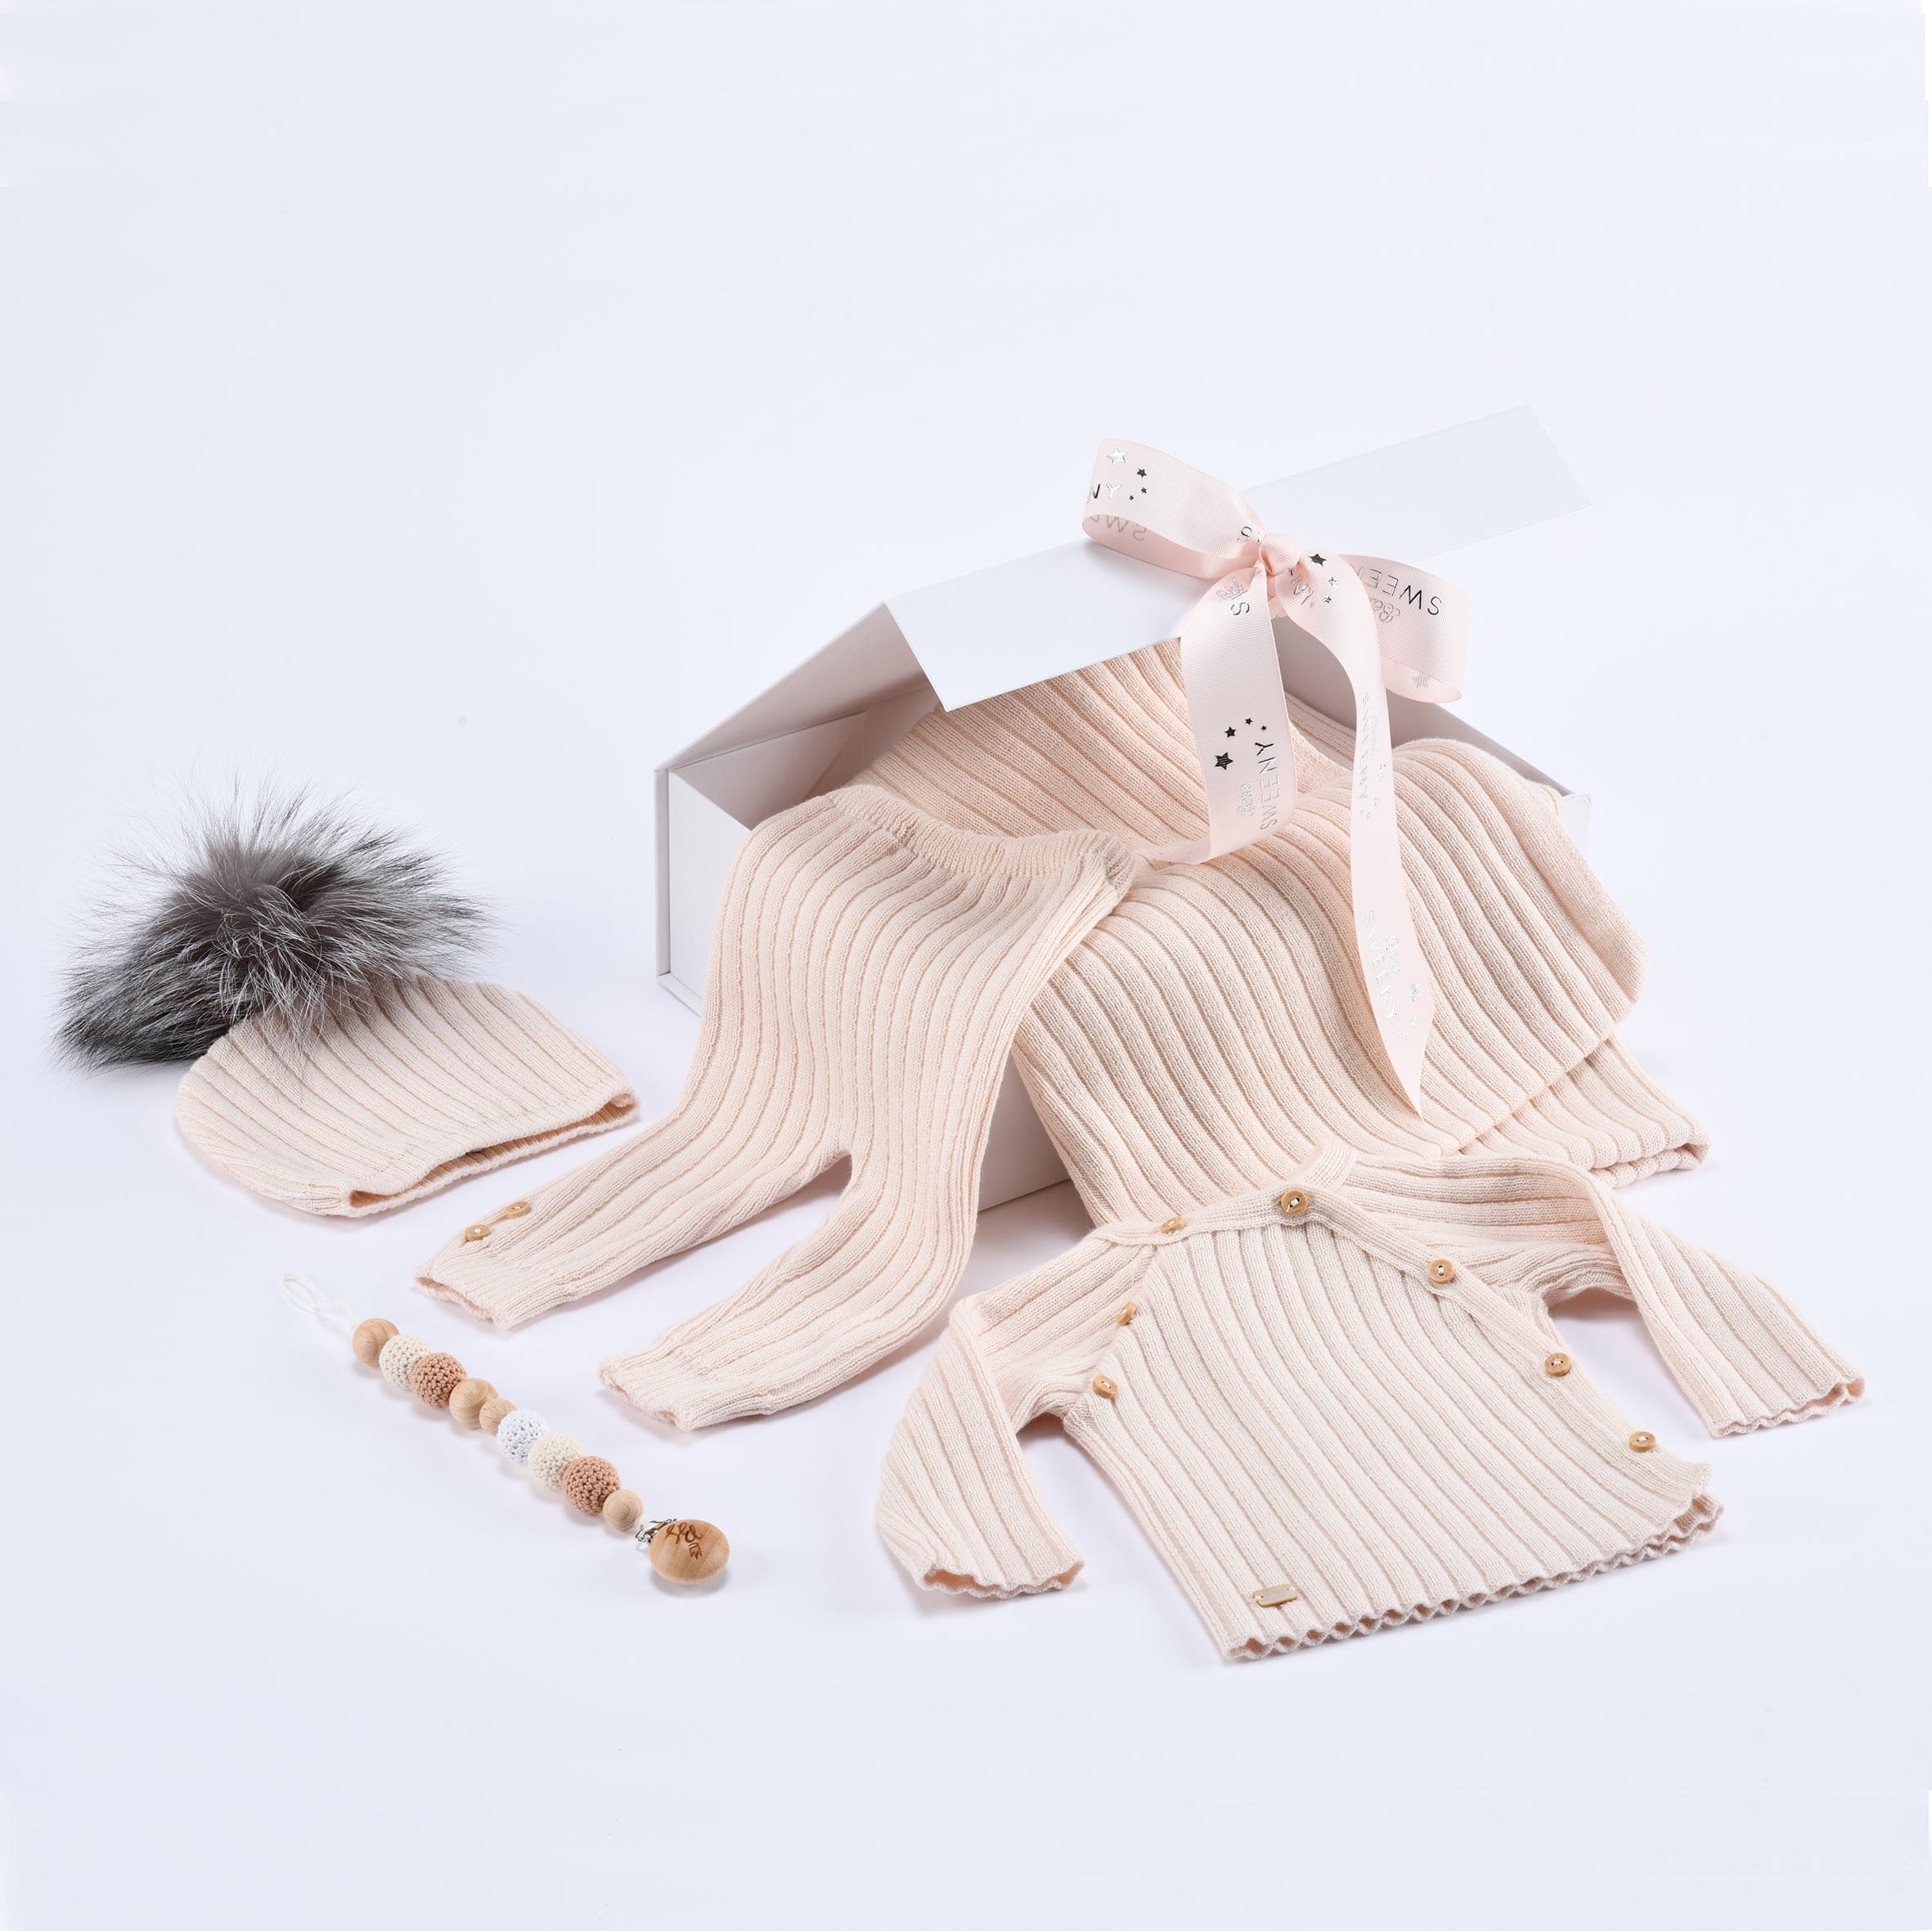 Maille Love | Girls Gift Box | Pale Pink Knit Set (5)